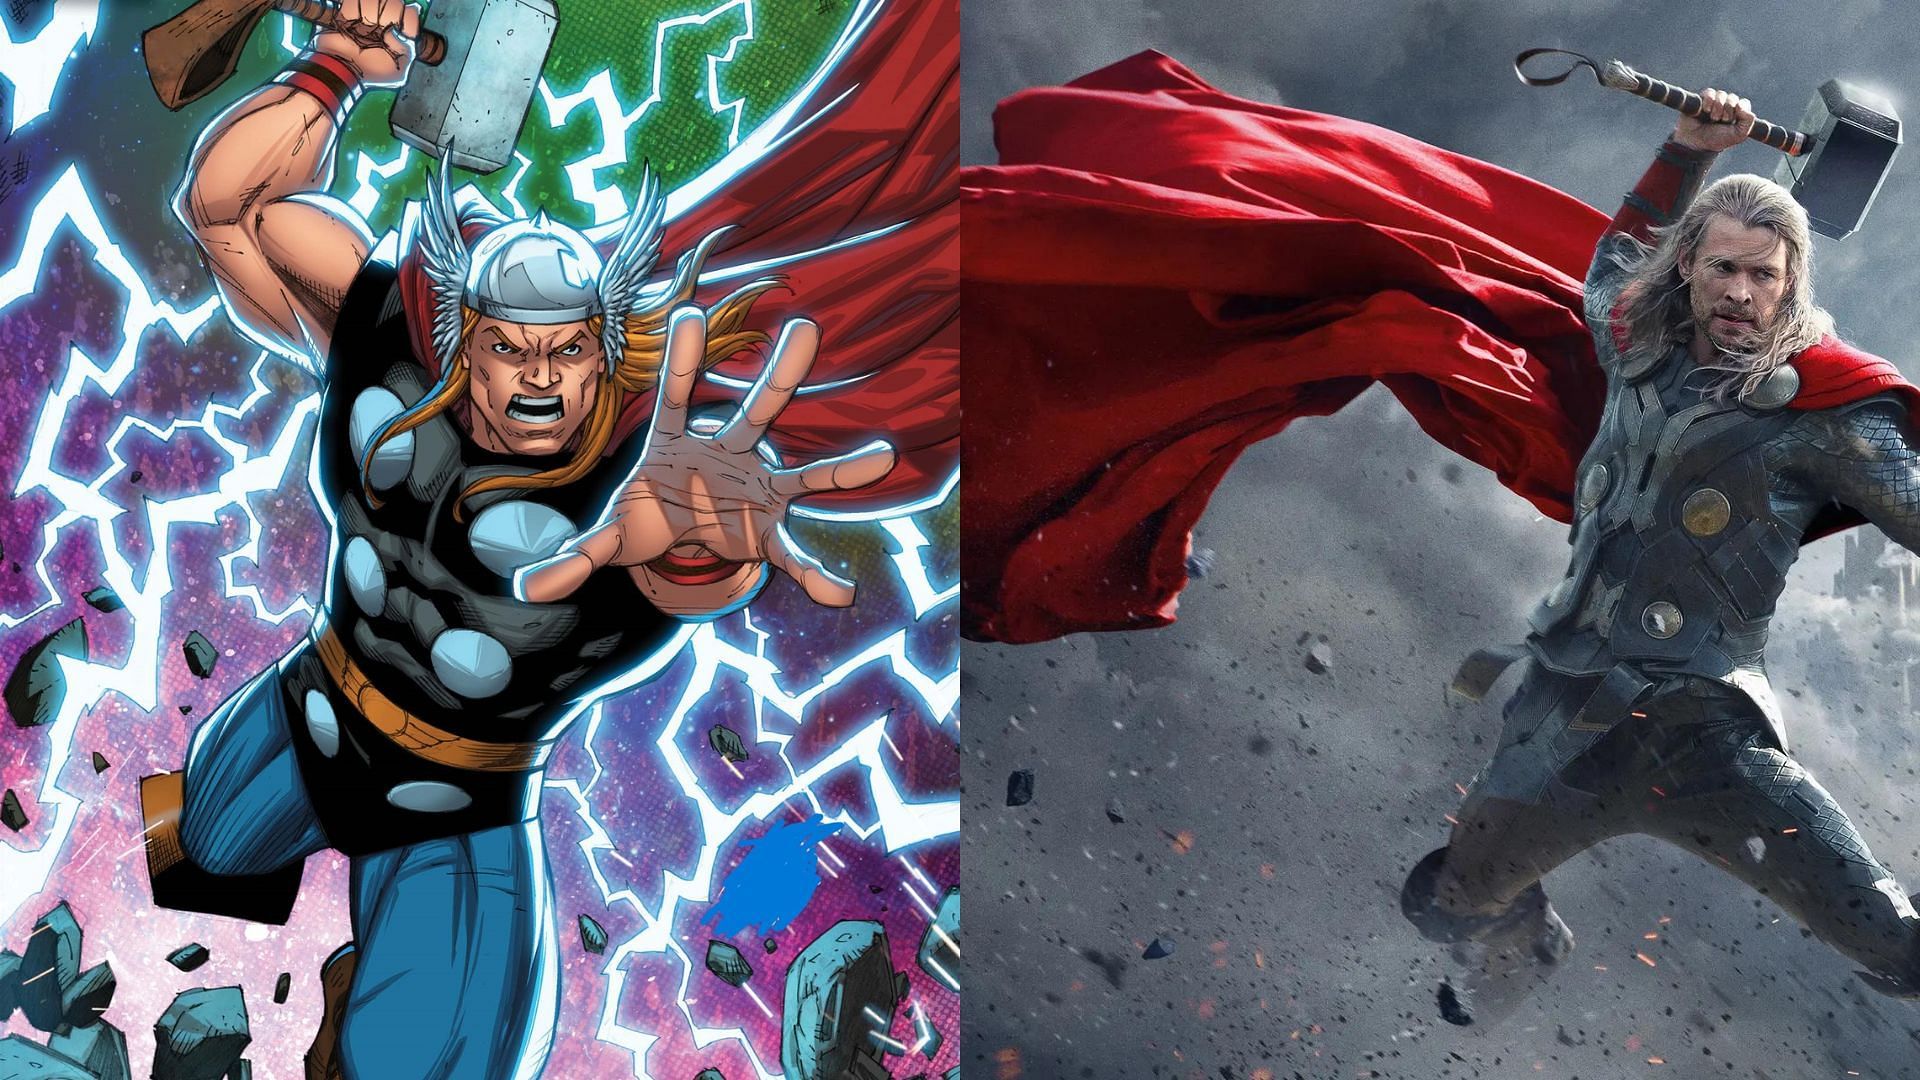 Thor is most famous among Marvel character as an Avenger (Image via Marvel)